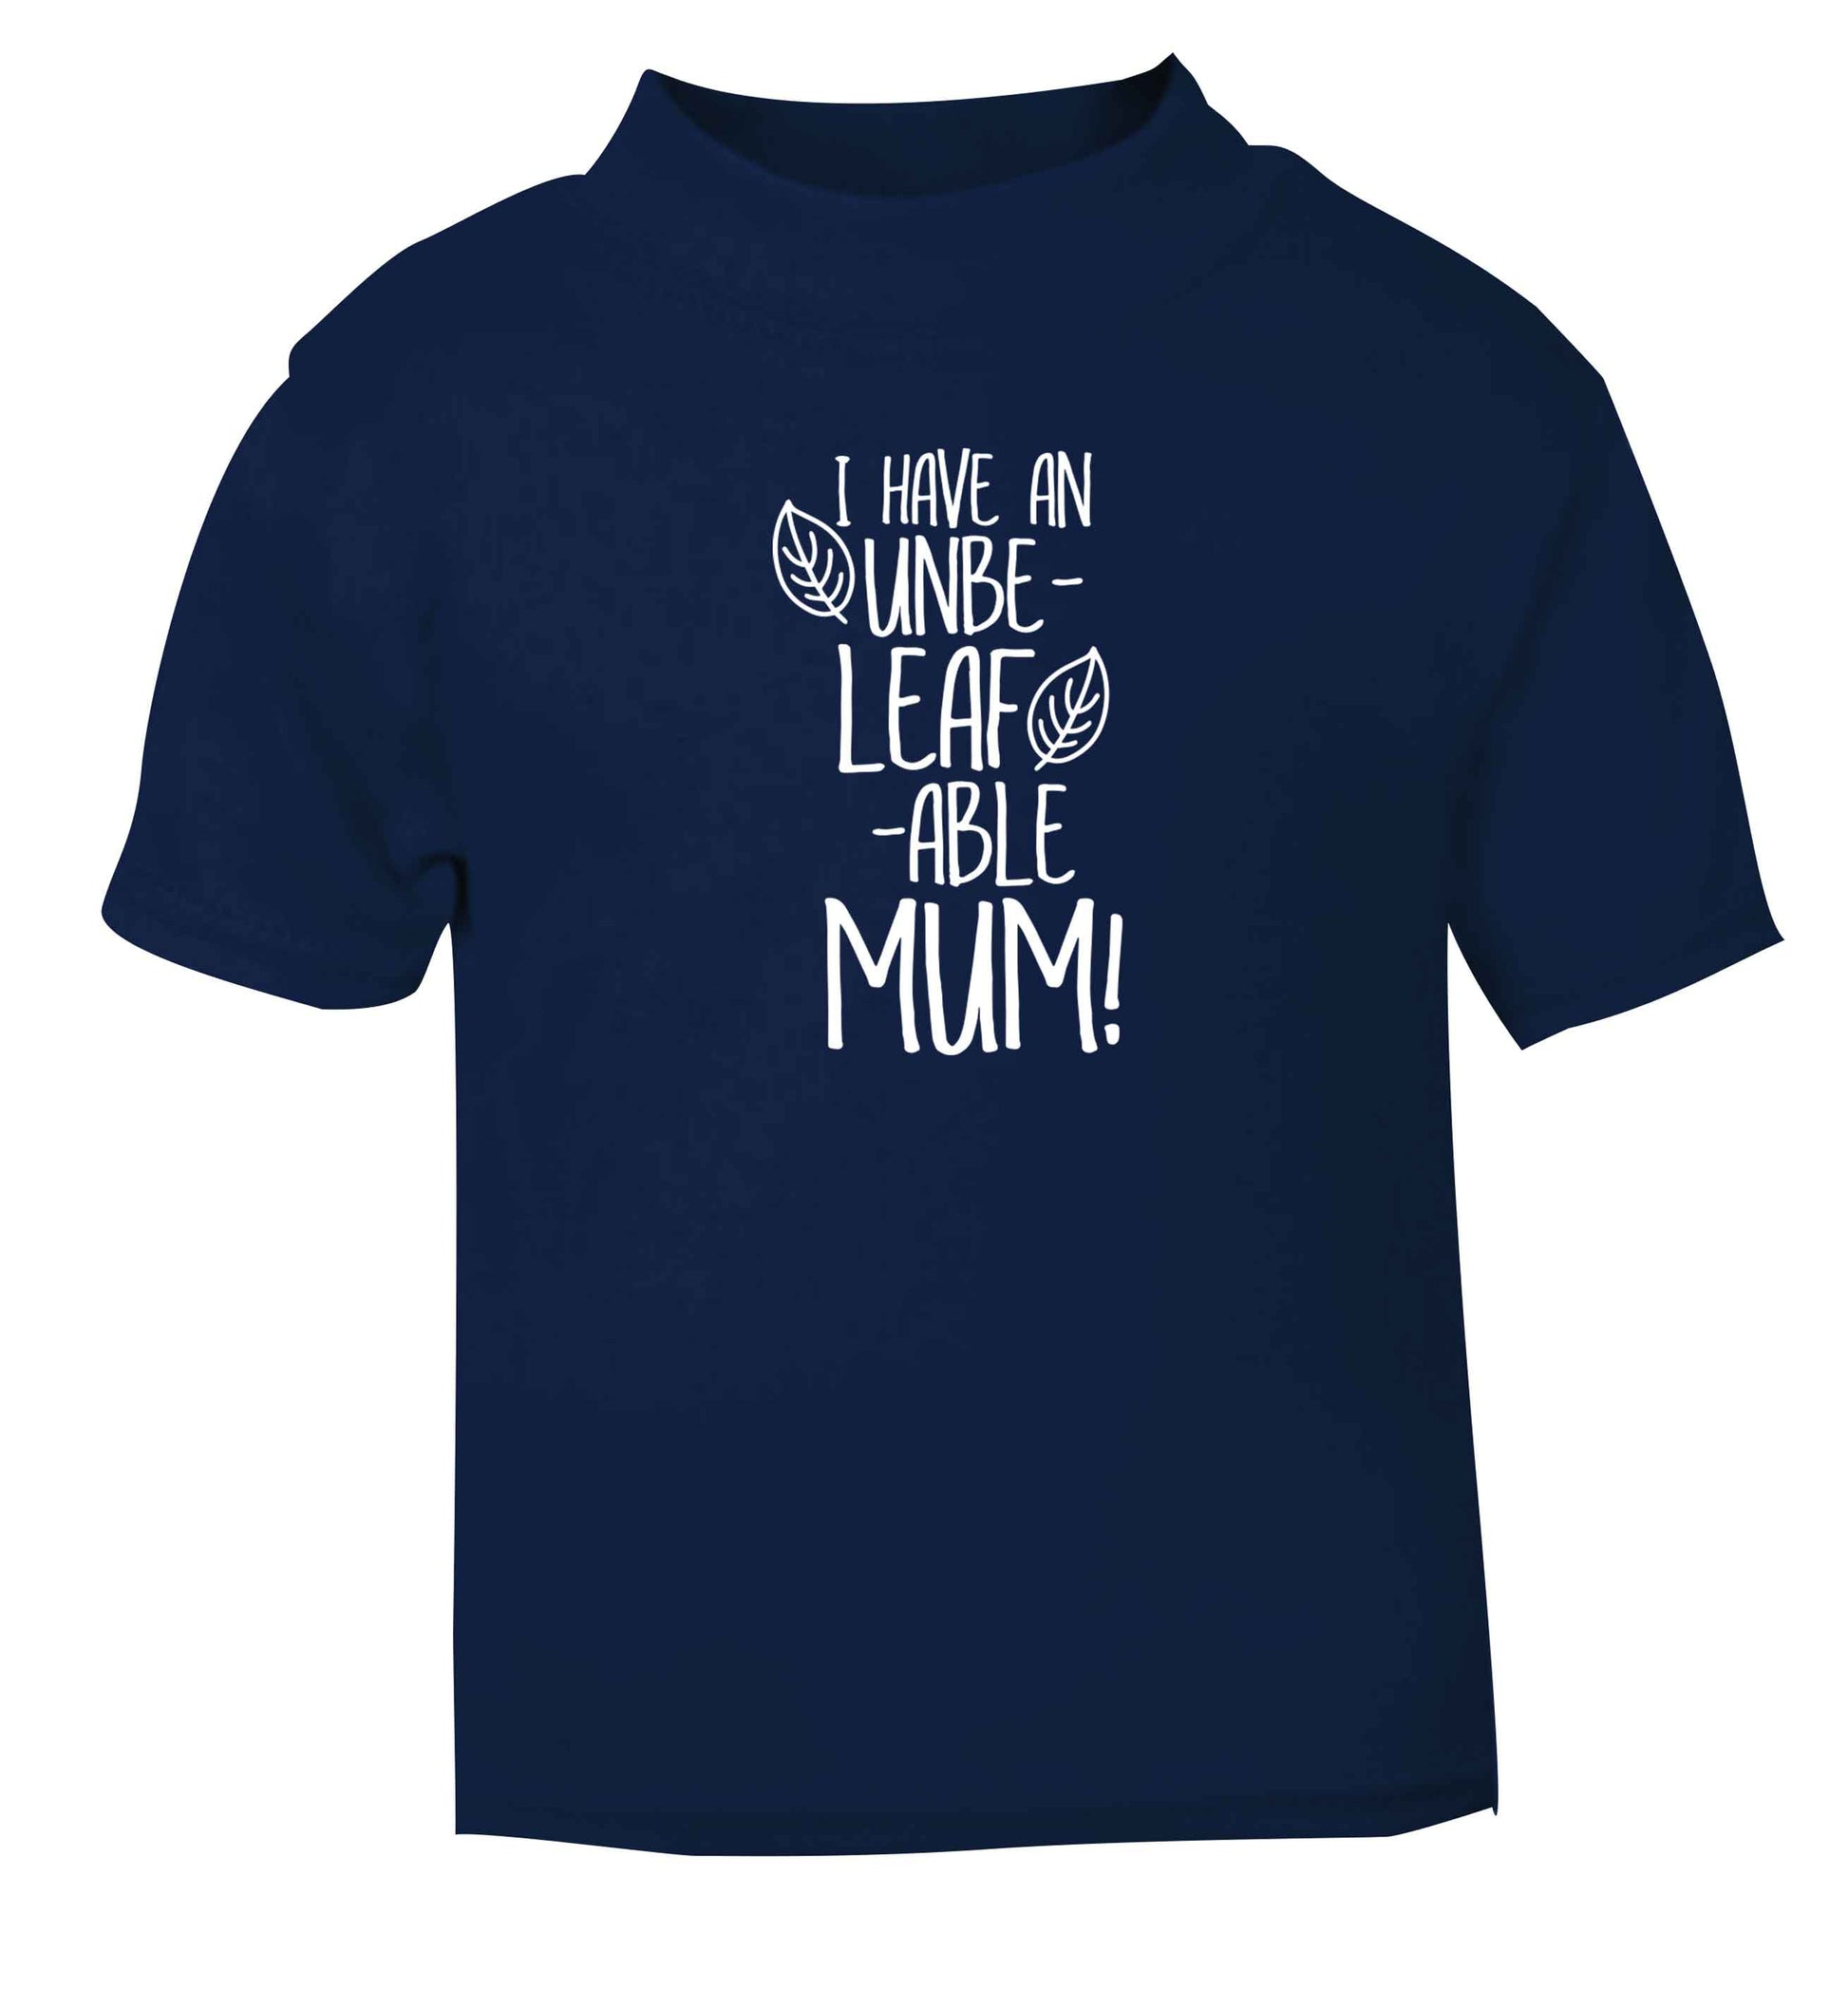 I have an unbeleafable mum! navy baby toddler Tshirt 2 Years